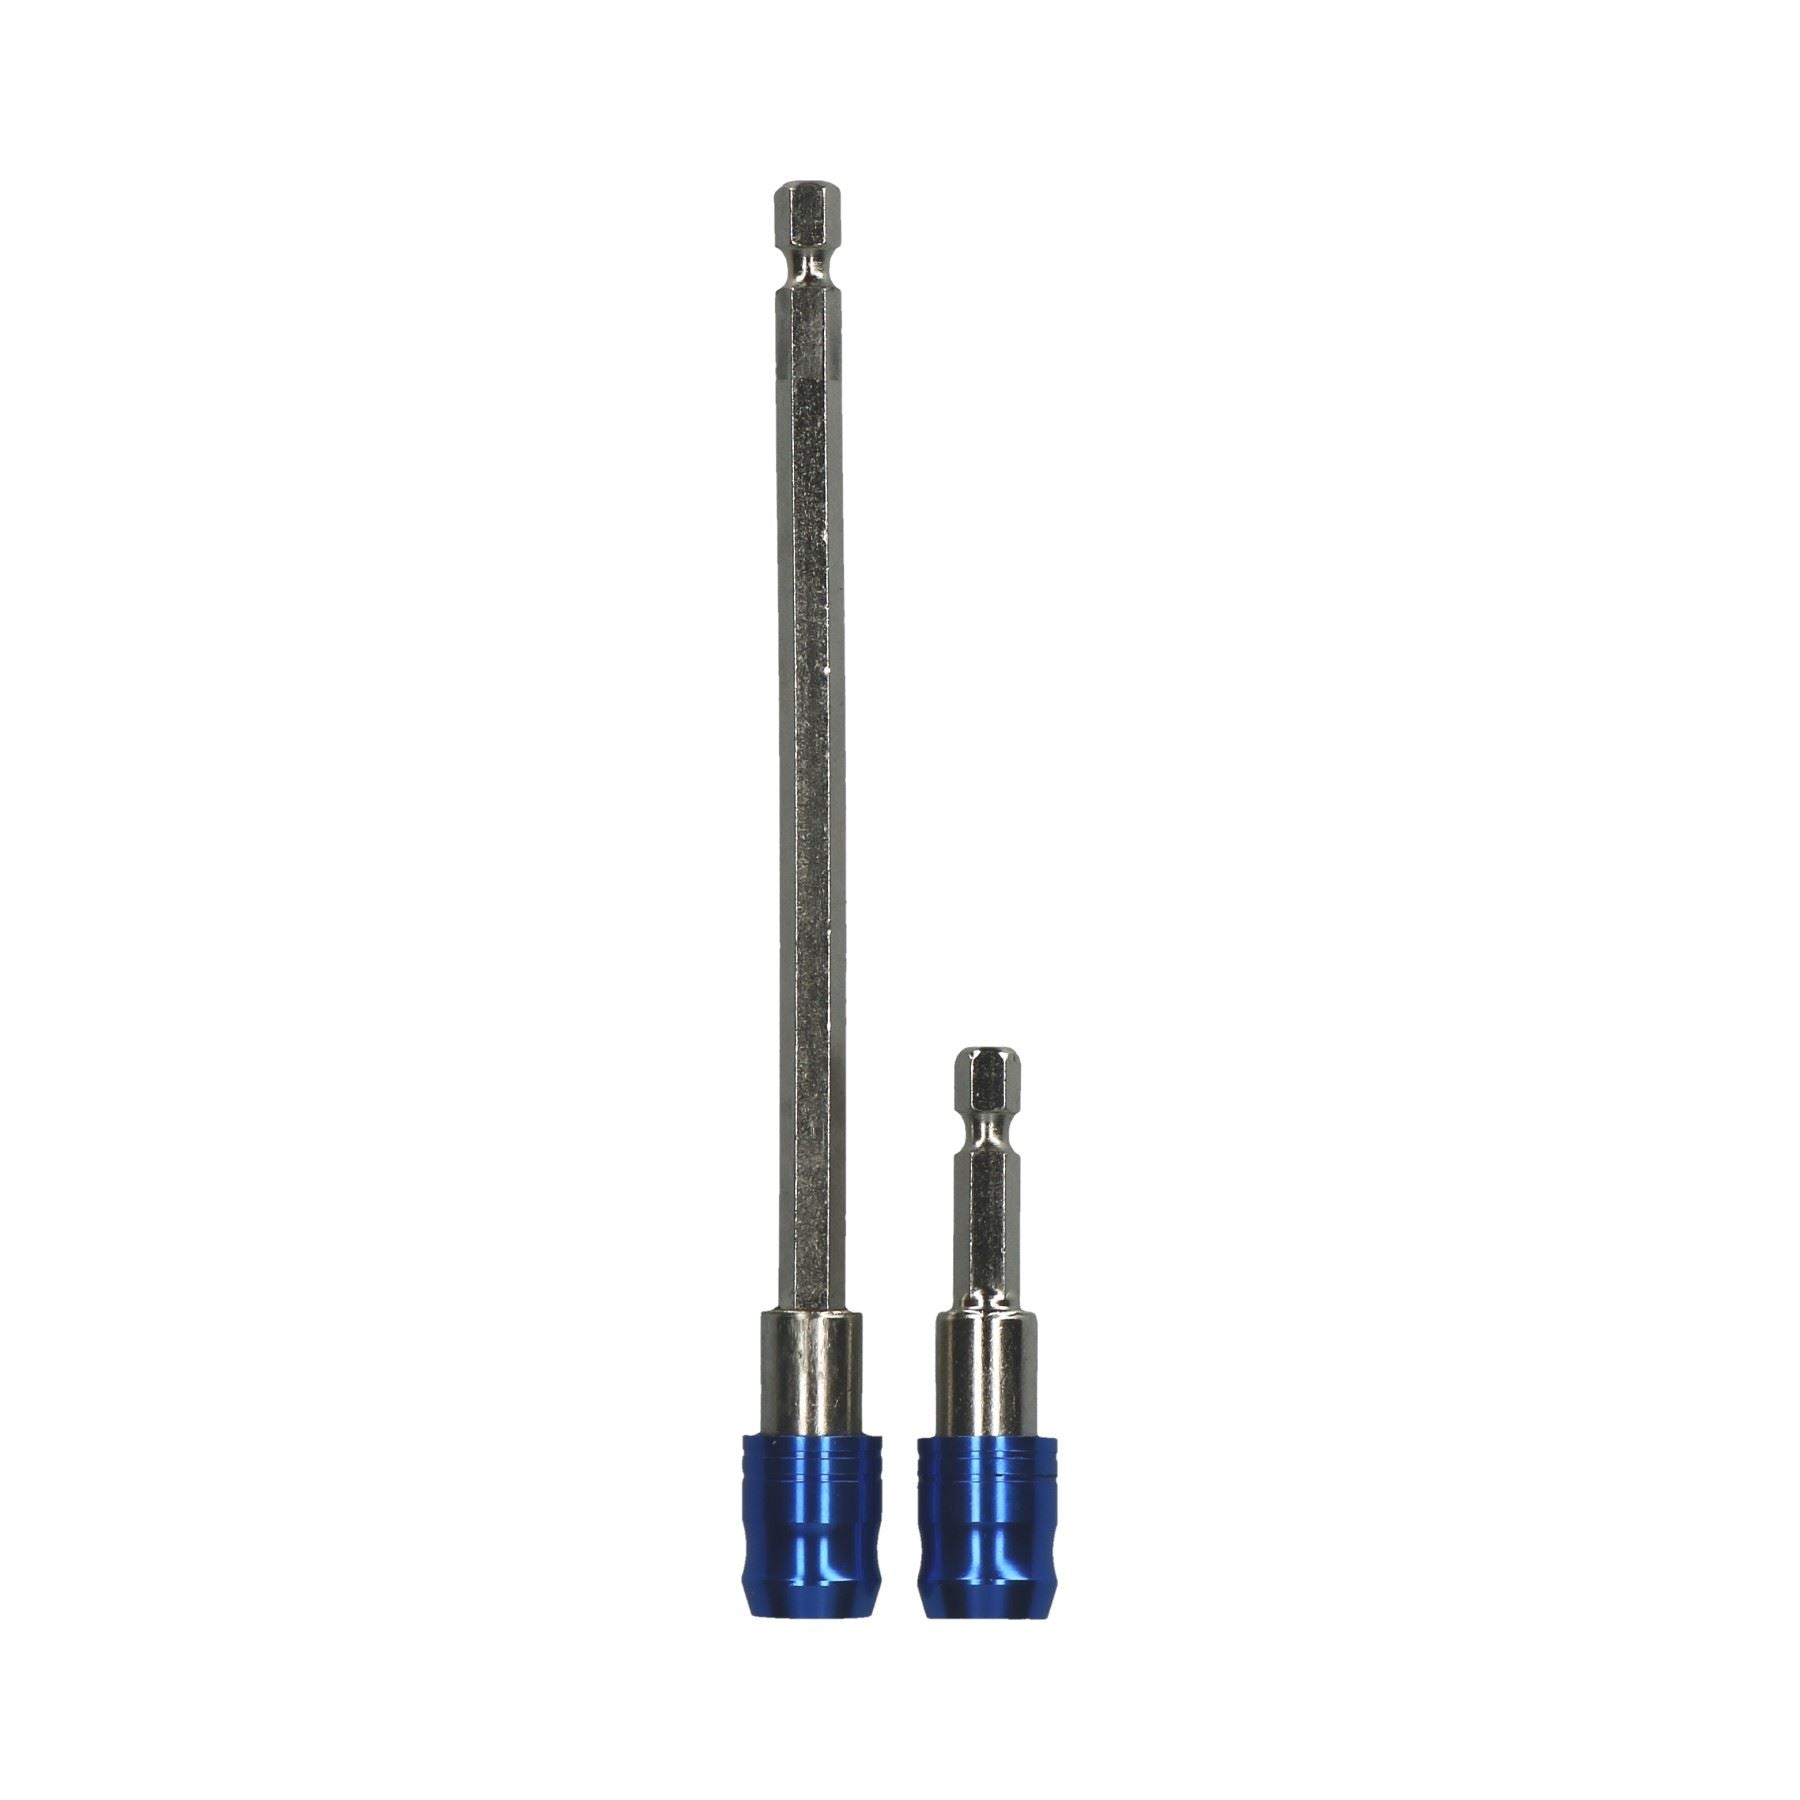 2pc Quick Release Magnetic 1/4" Hex Drill Bit Adapter Holder Set 60mm / 150mm